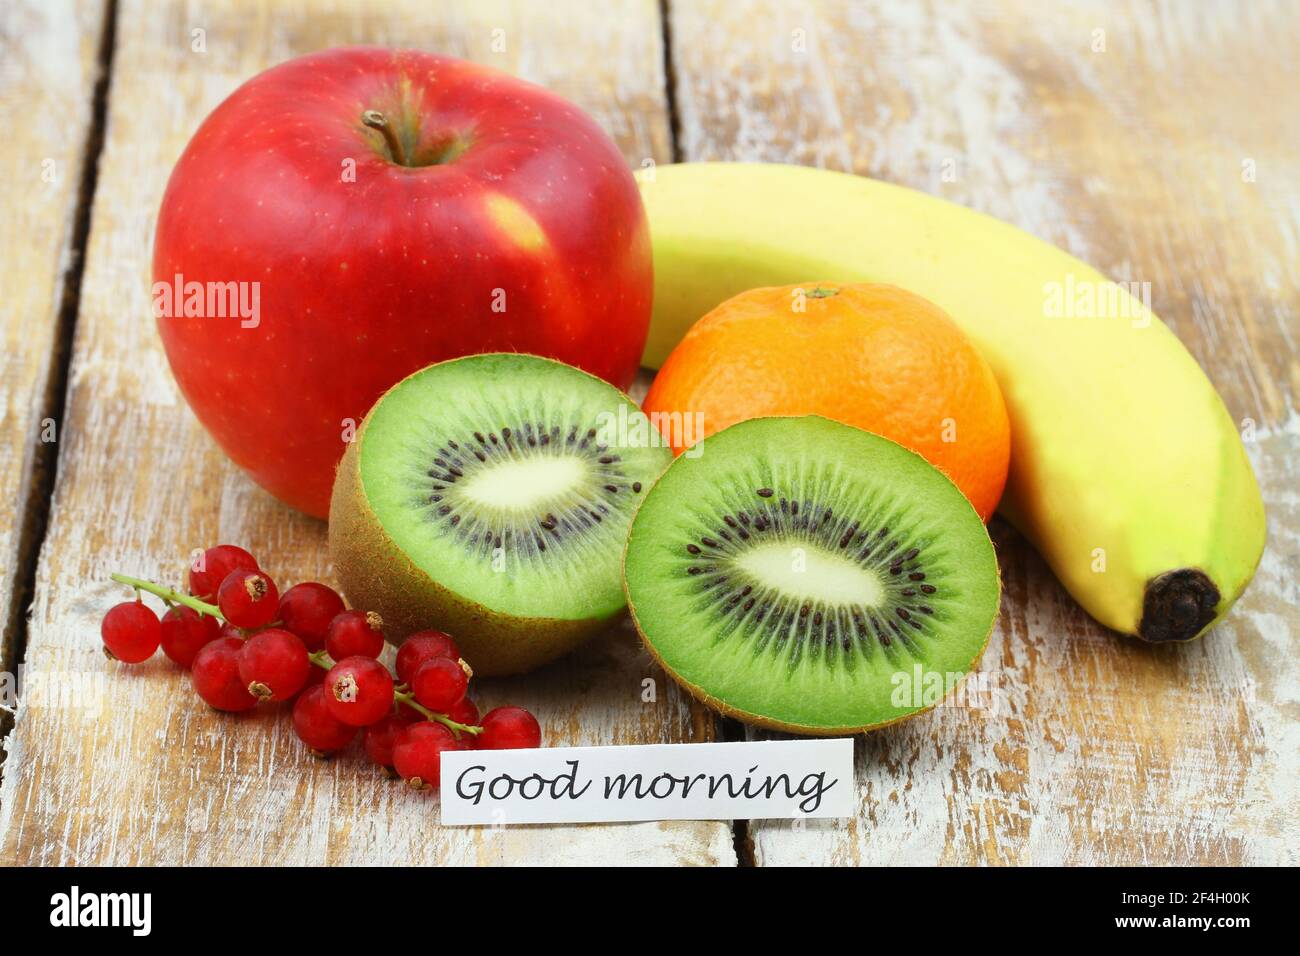 Good morning card with selection of healthy, fresh fruit on wooden surface Stock Photo